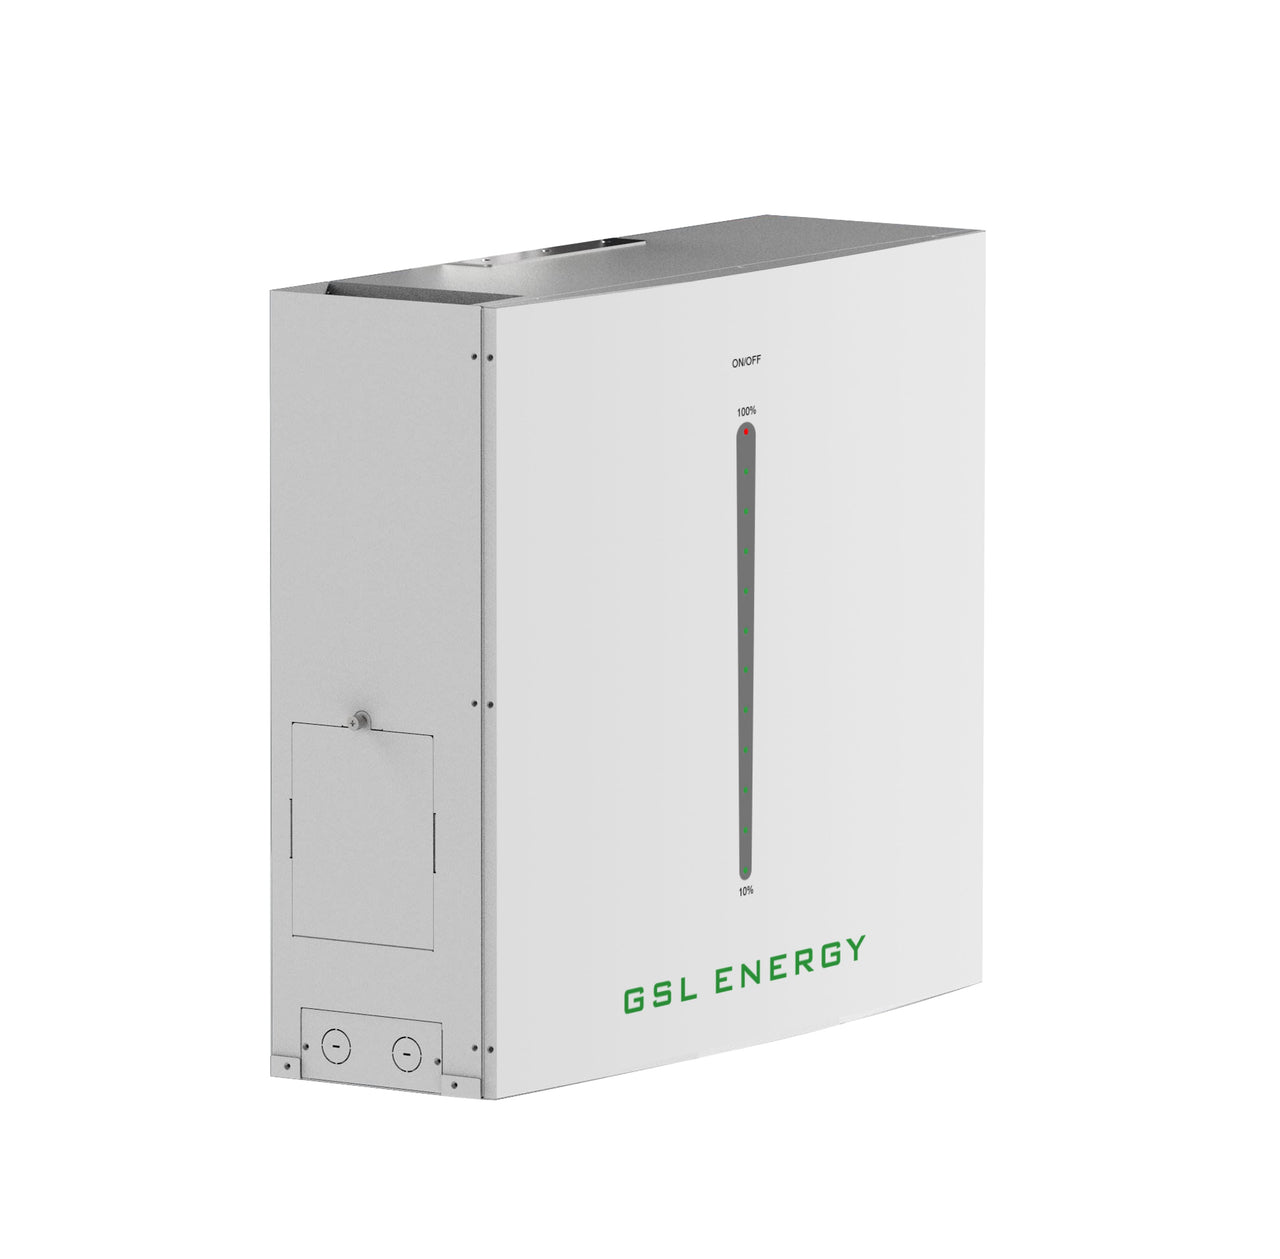 4 X GSL 10.24kwh battery (40.96kwh) Compatible with GSL, Sunsynk, Victron & Voltronic £9,980 +VAT